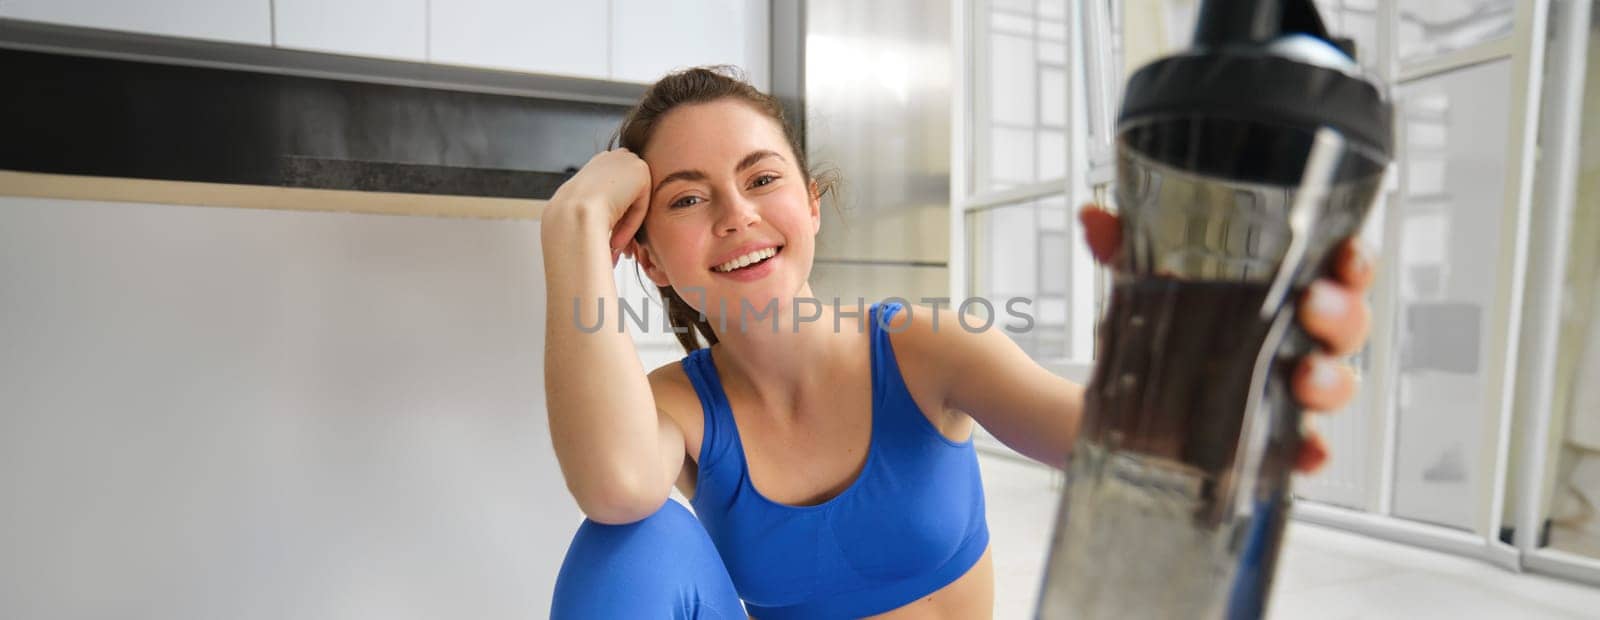 Close up portrait of happy, healthy young woman, give you sports water bottle, stays hydrated during fitness session, workout indoors at home.